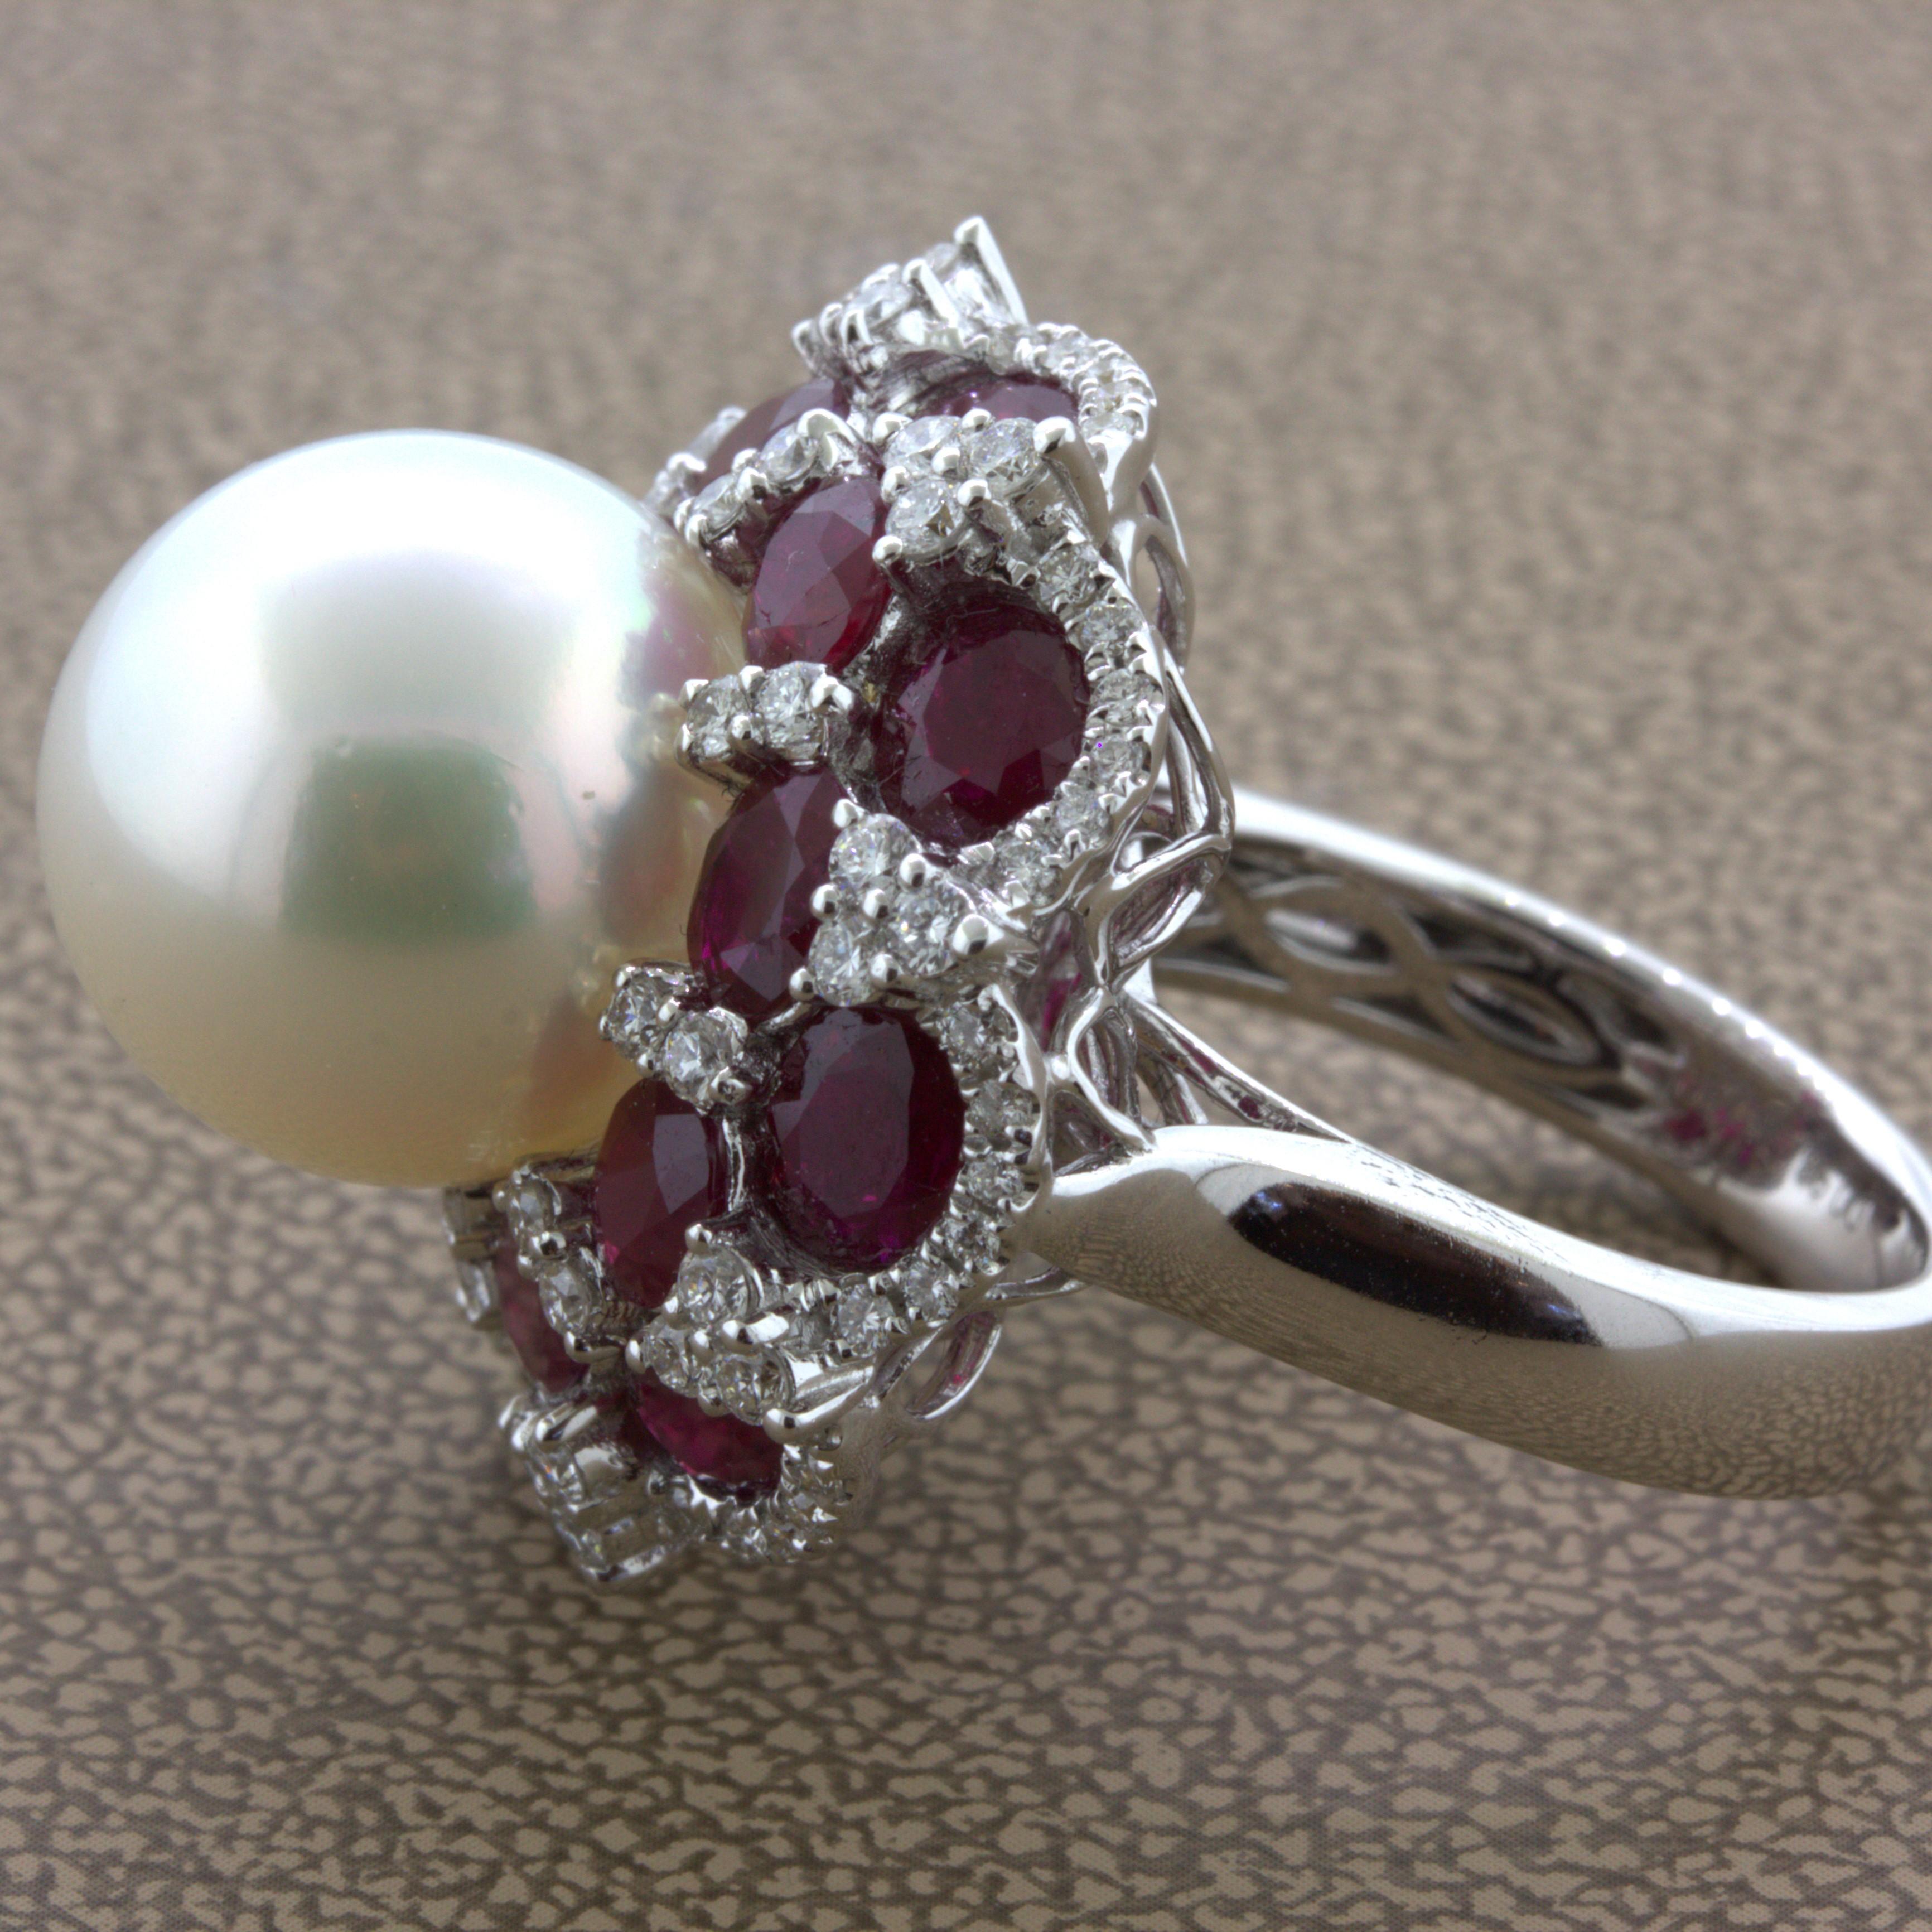 15mm South Sea Pearl Ruby Diamond 18k White Gold Cocktail Ring For Sale 1